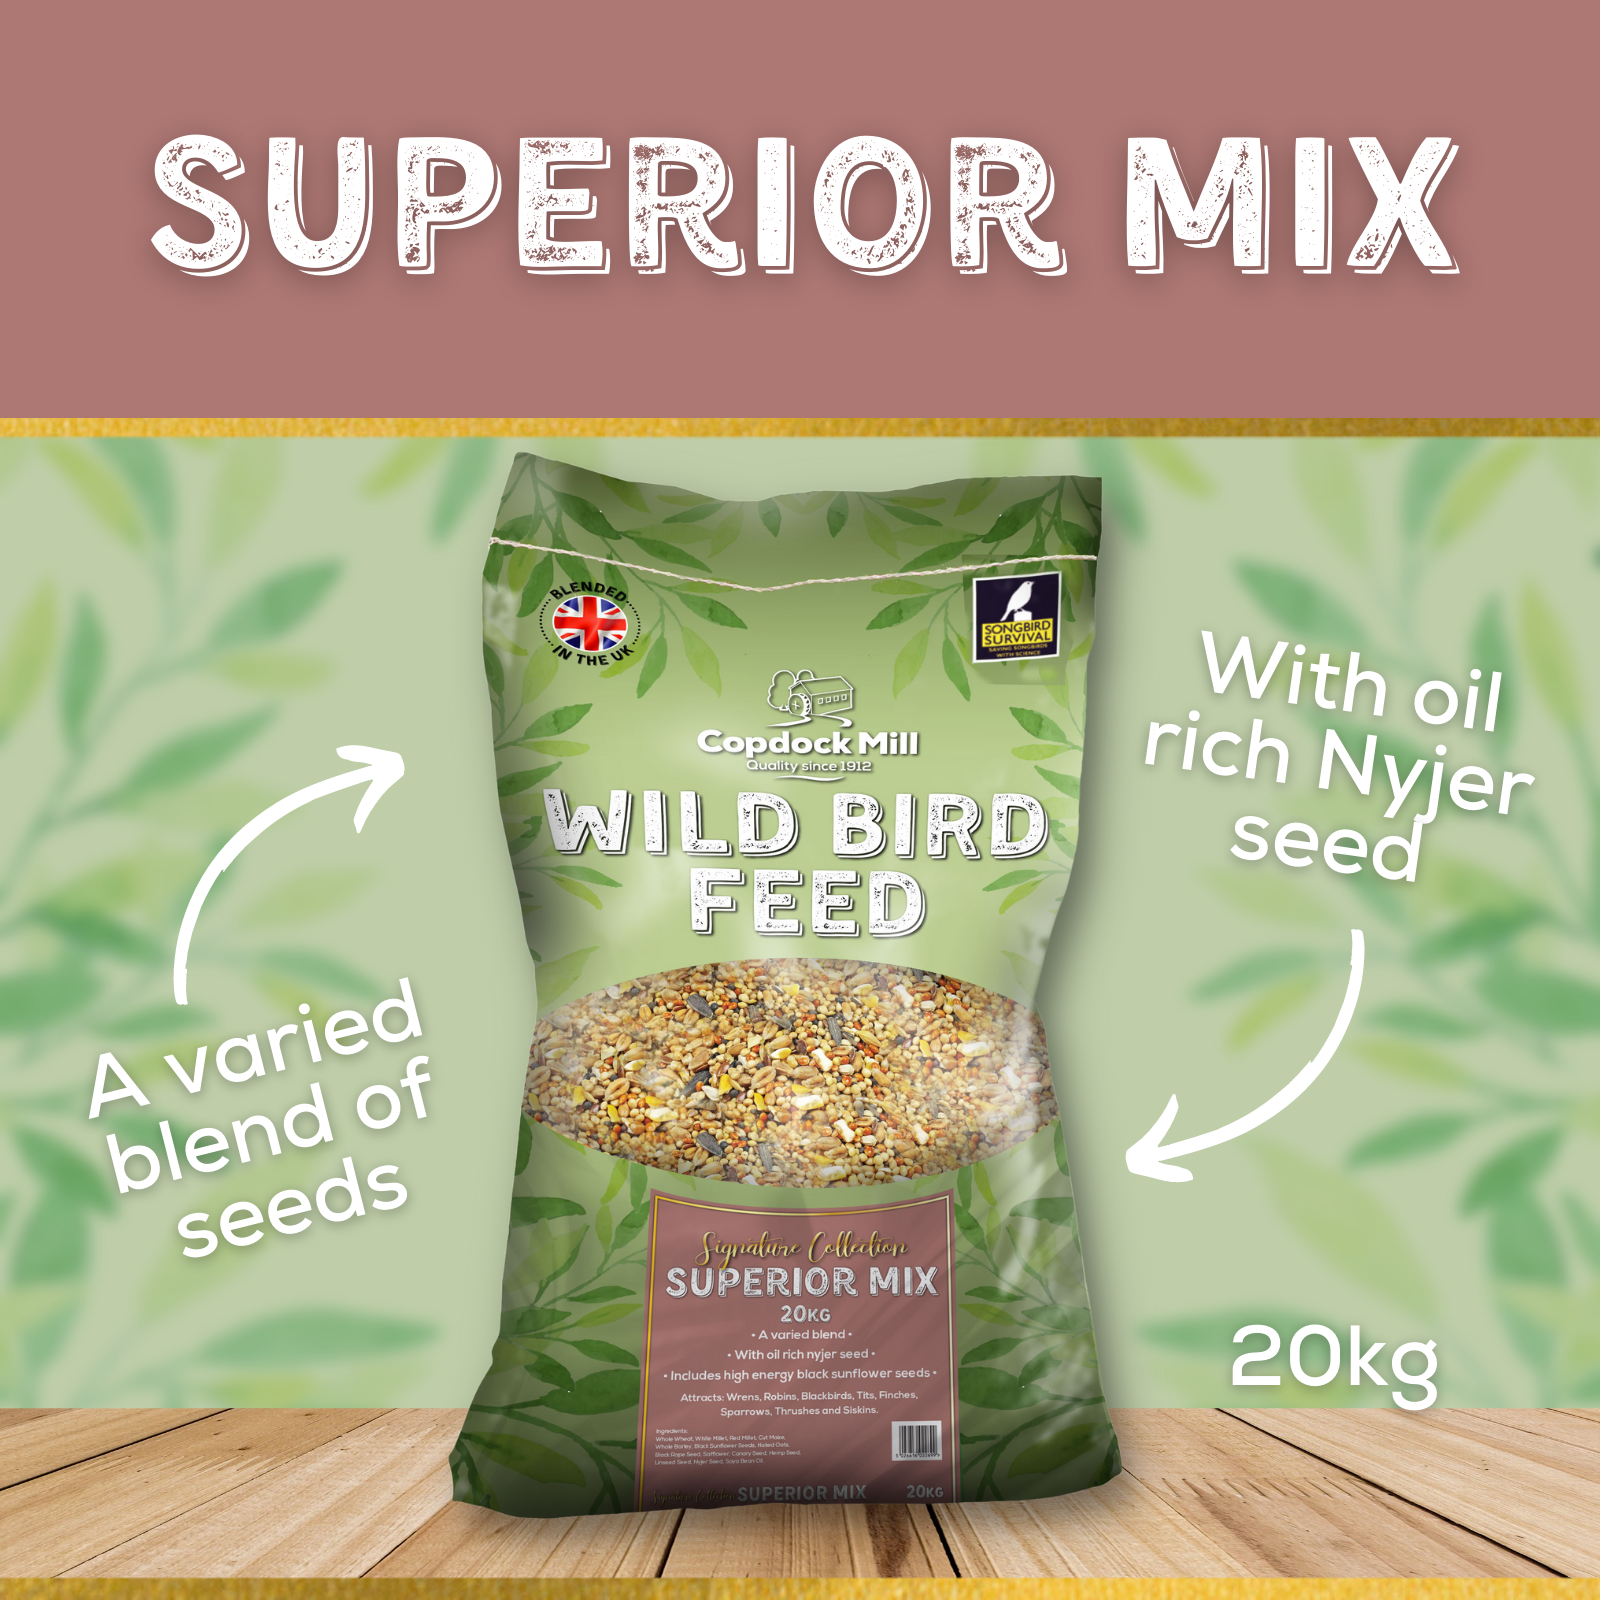 Features: A varied blend of seeds. With oil rich Nyjer seed.